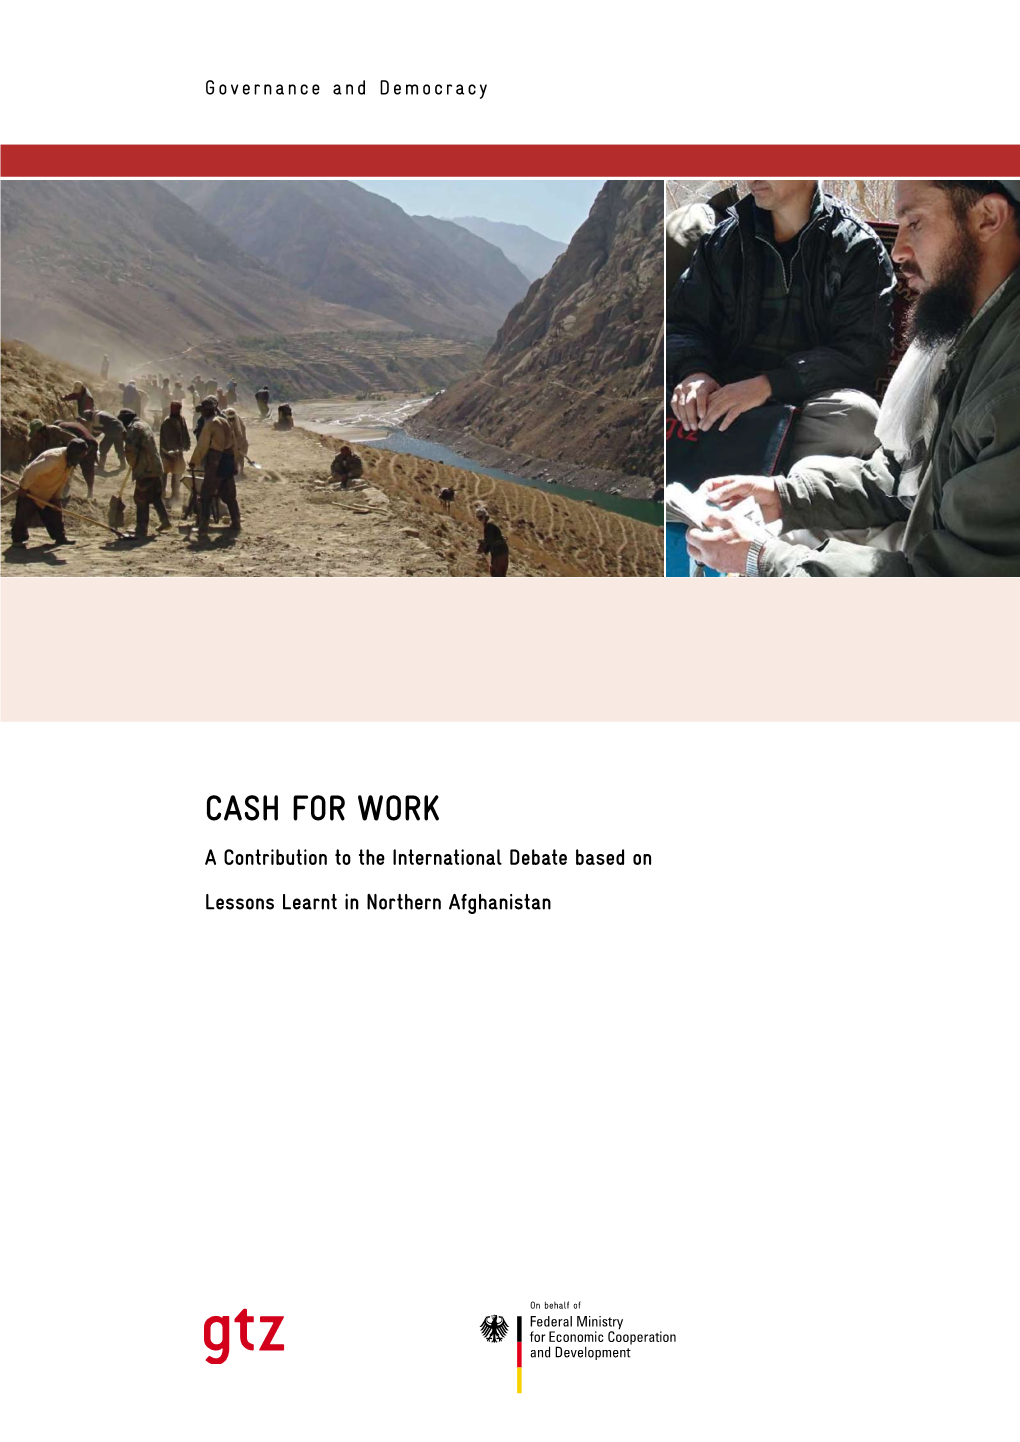 CASH for WORK a Contribution to the International Debate Based on Lessons Learnt in Northern Afghanistan Imprint